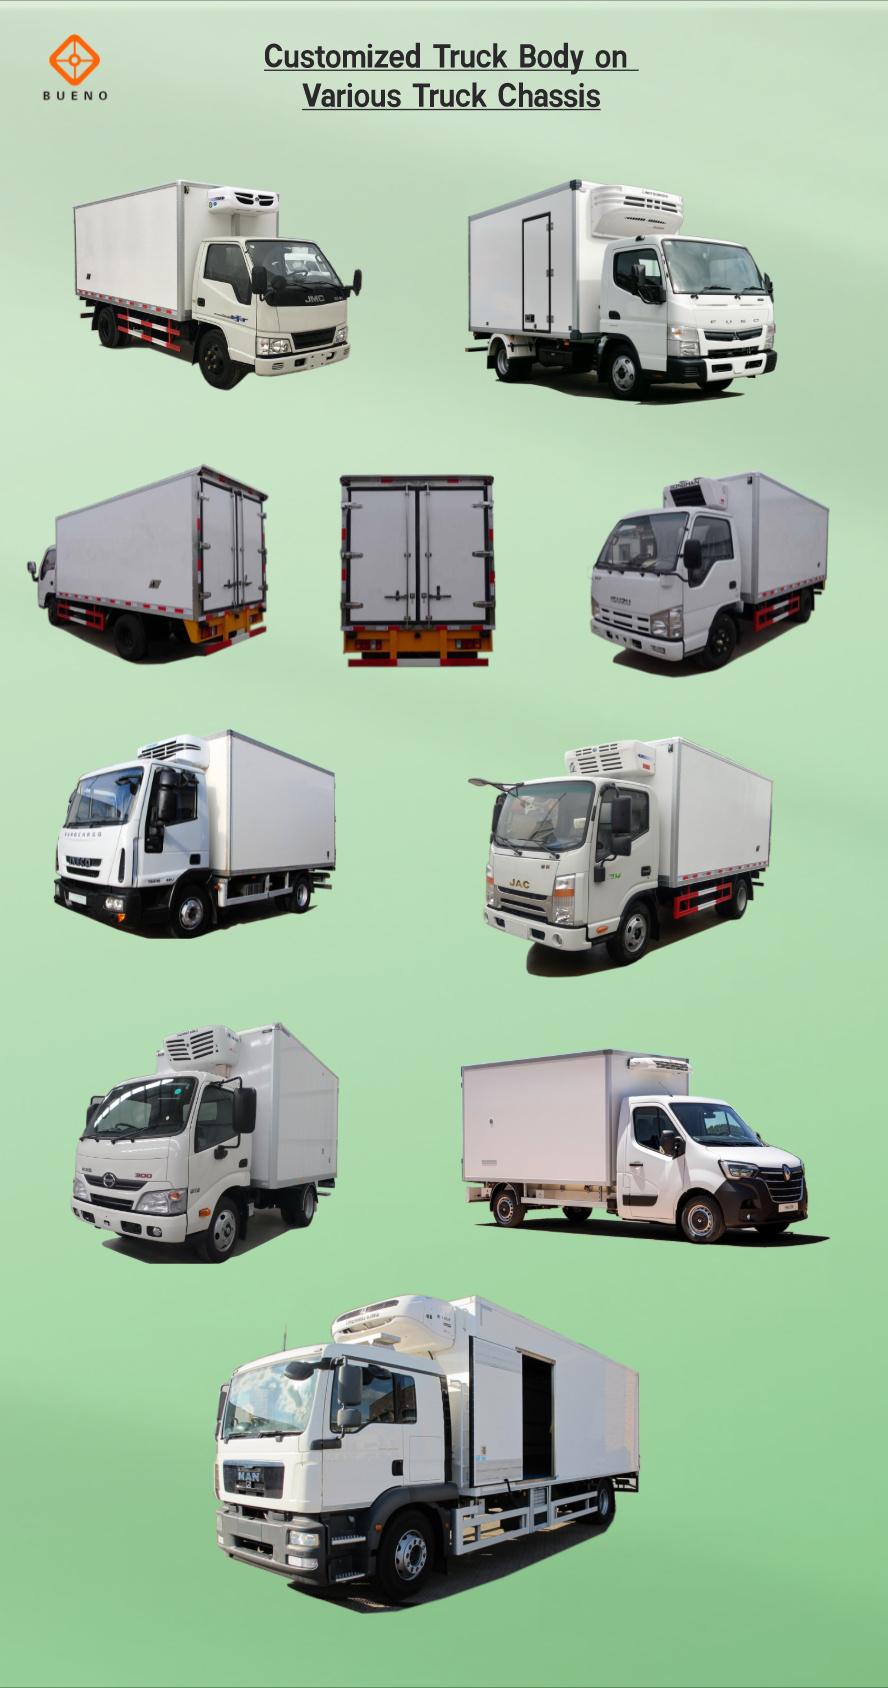 Bueno Brand High Quality FRP Composite Panel Insulation Refrigerated Truck Body for Isuzu Hino Renault Truck Chassis